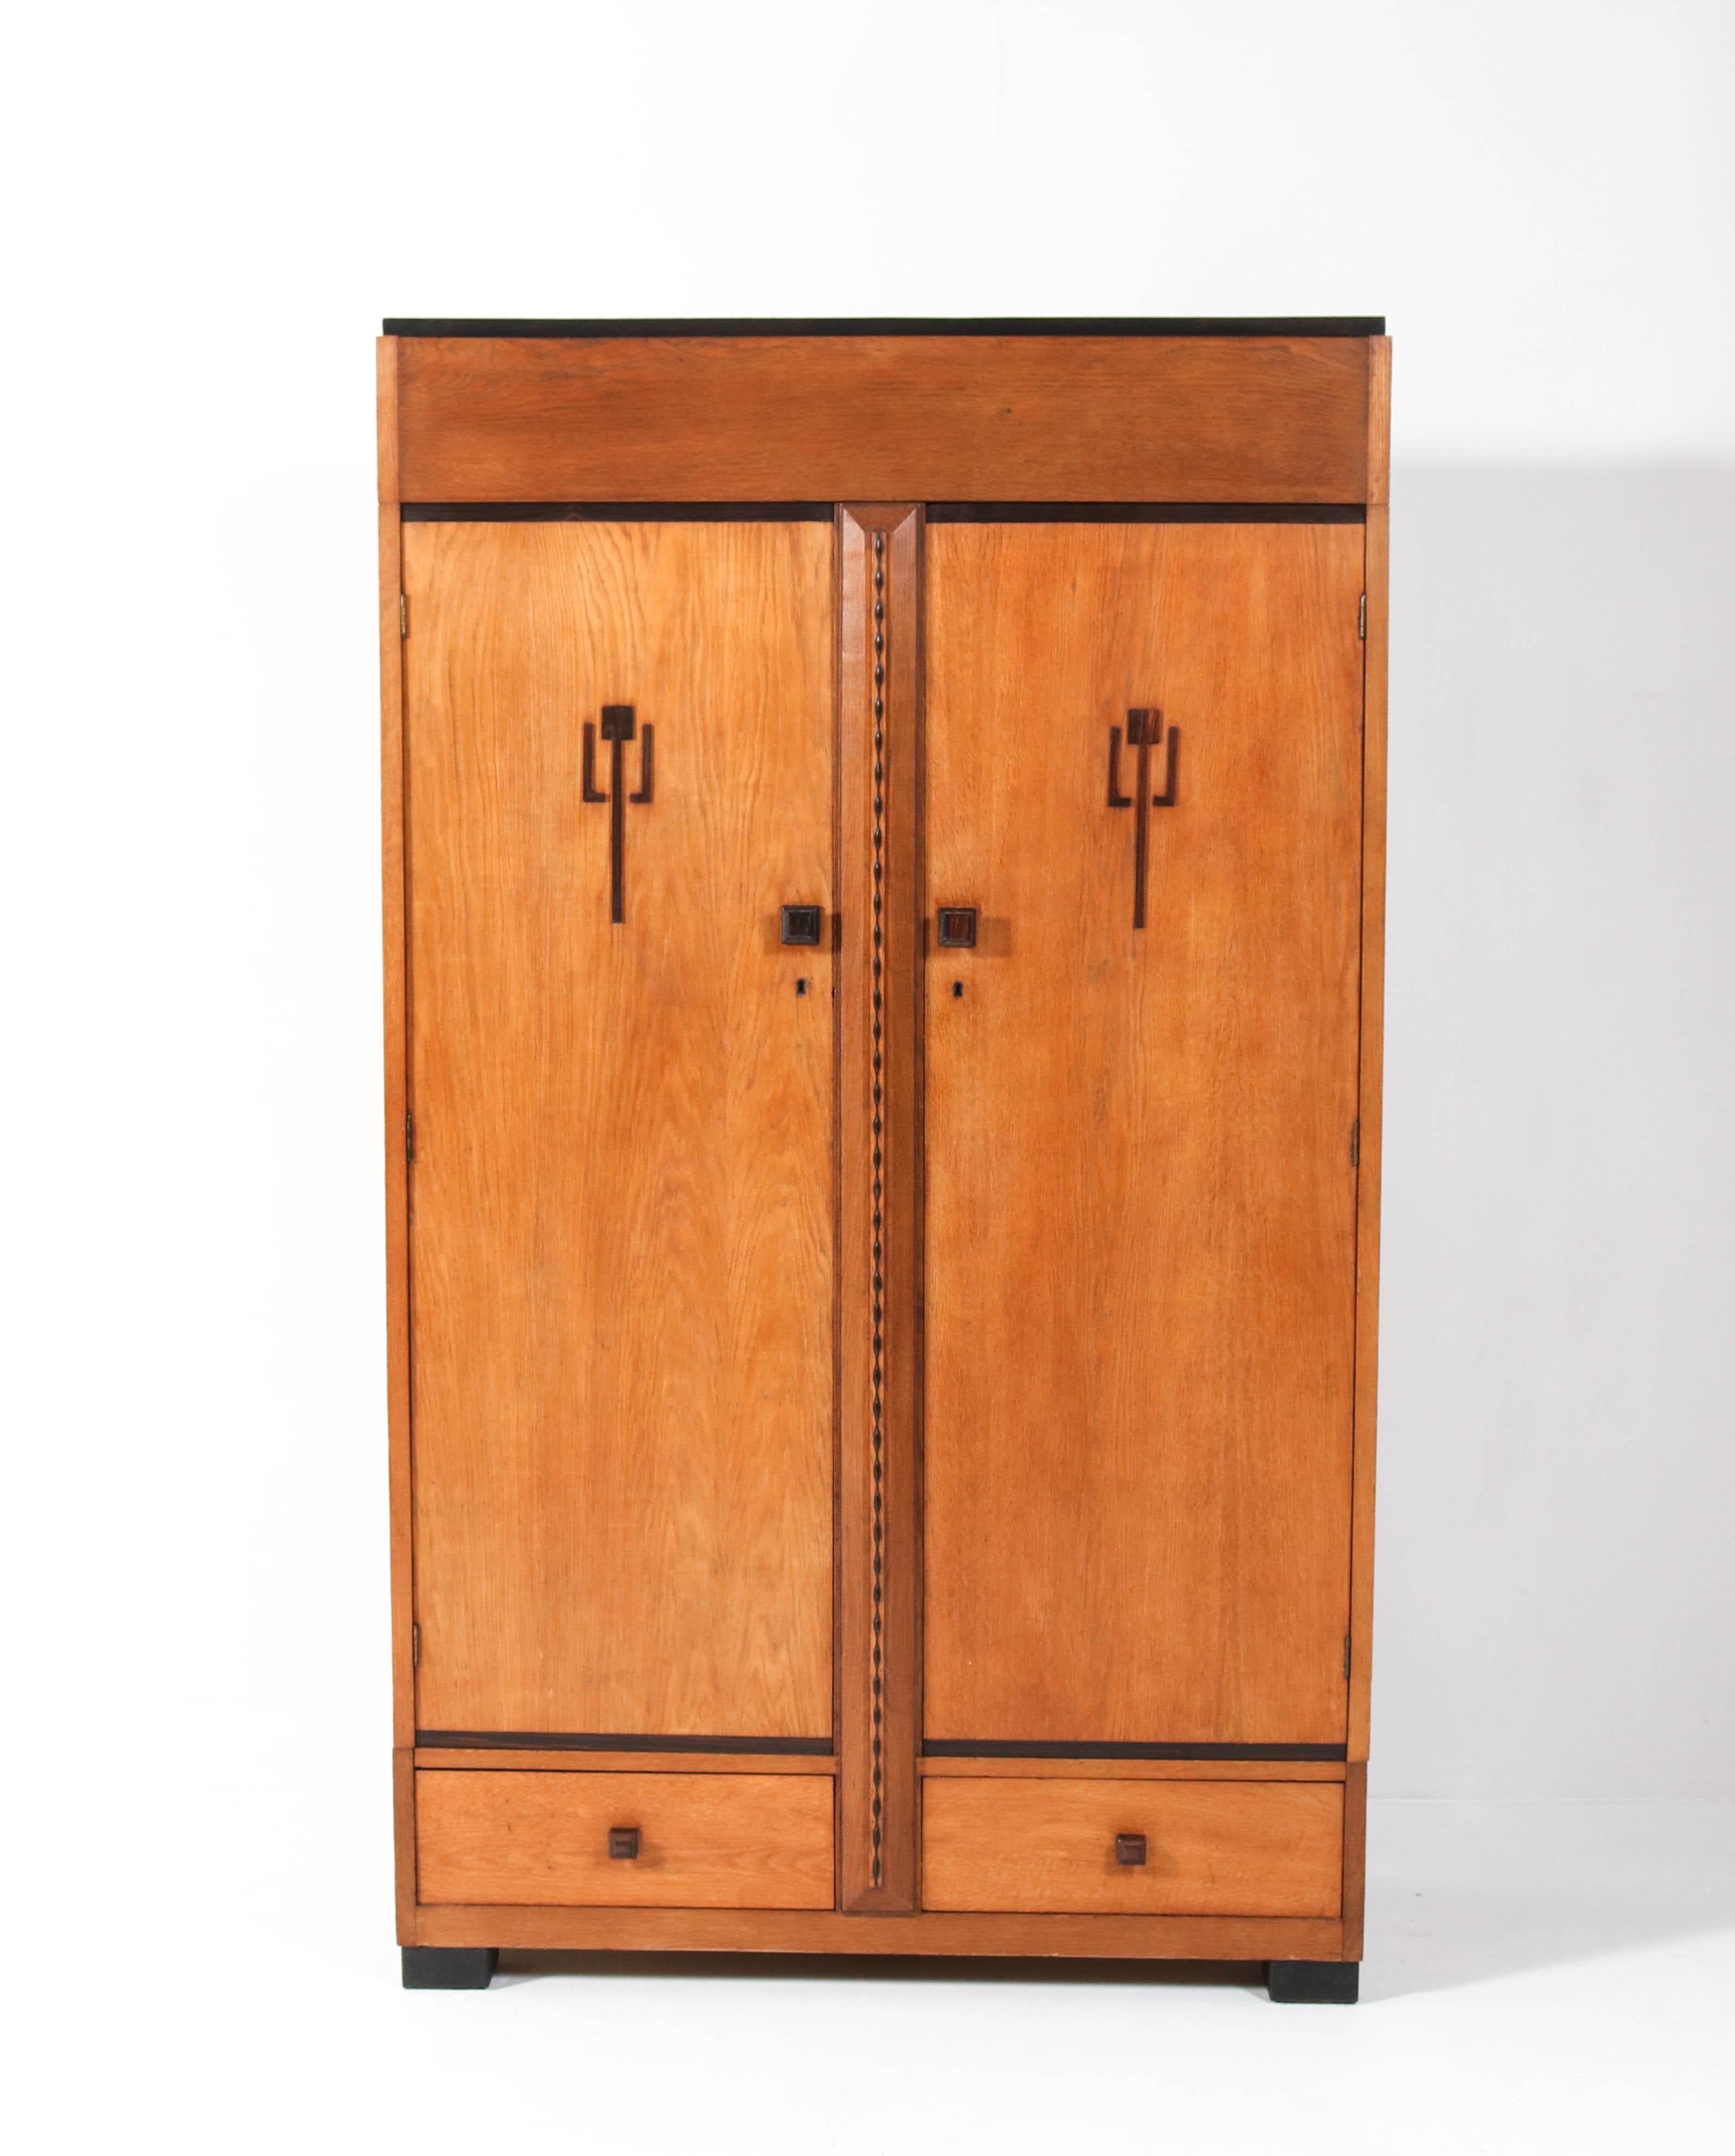 Stunning and rare Art Deco Amsterdam School armoire or wardrobe.
Striking Dutch design from the 1920s.
Solid oak and oak veneer with solid Macassar ebony handles.
Four solid oak shelves adjustable in height.
This wonderful piece of furniture can